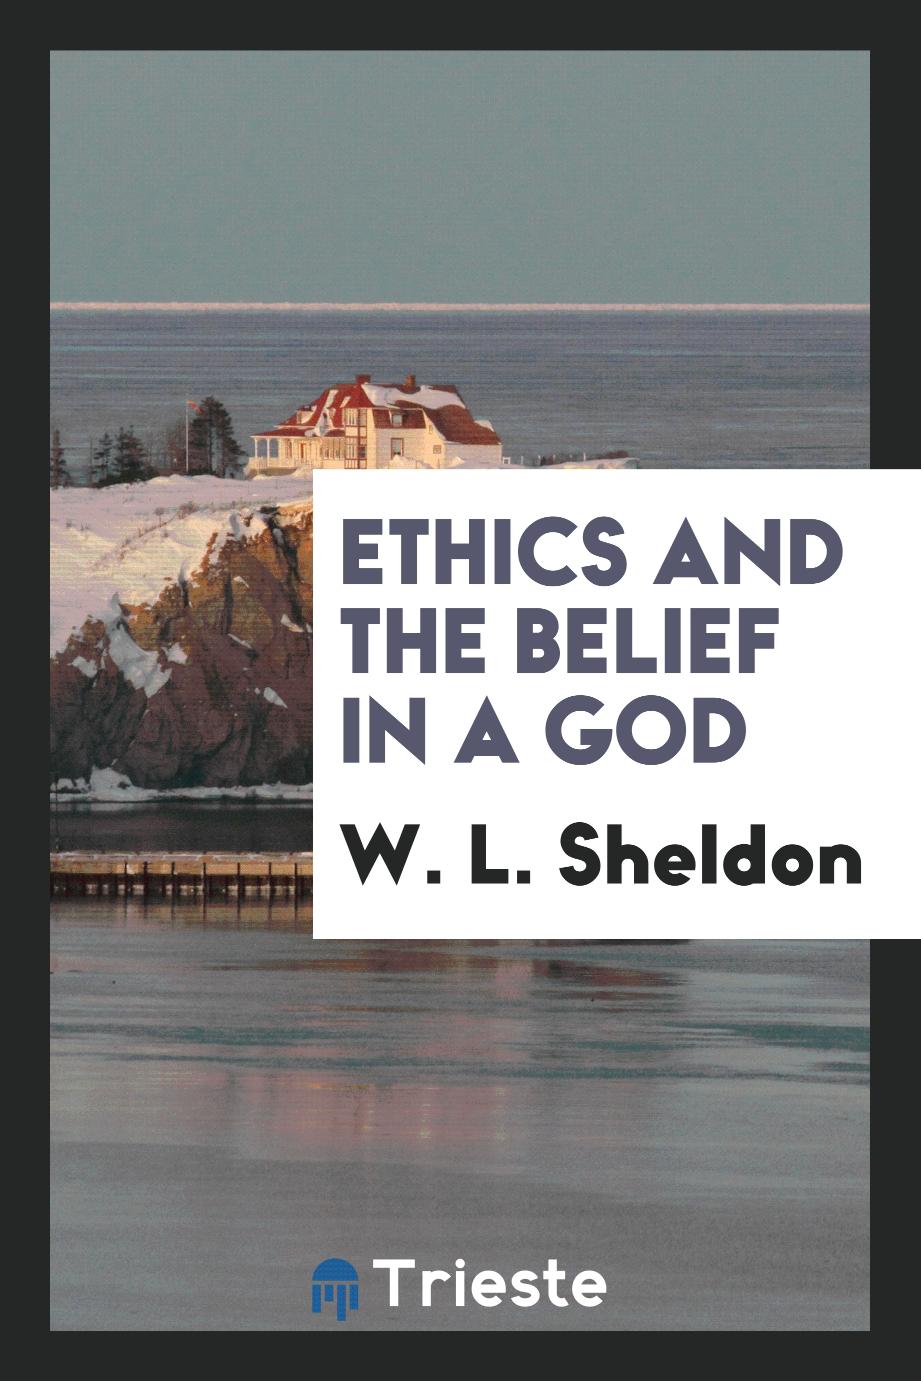 Ethics and the belief in a God